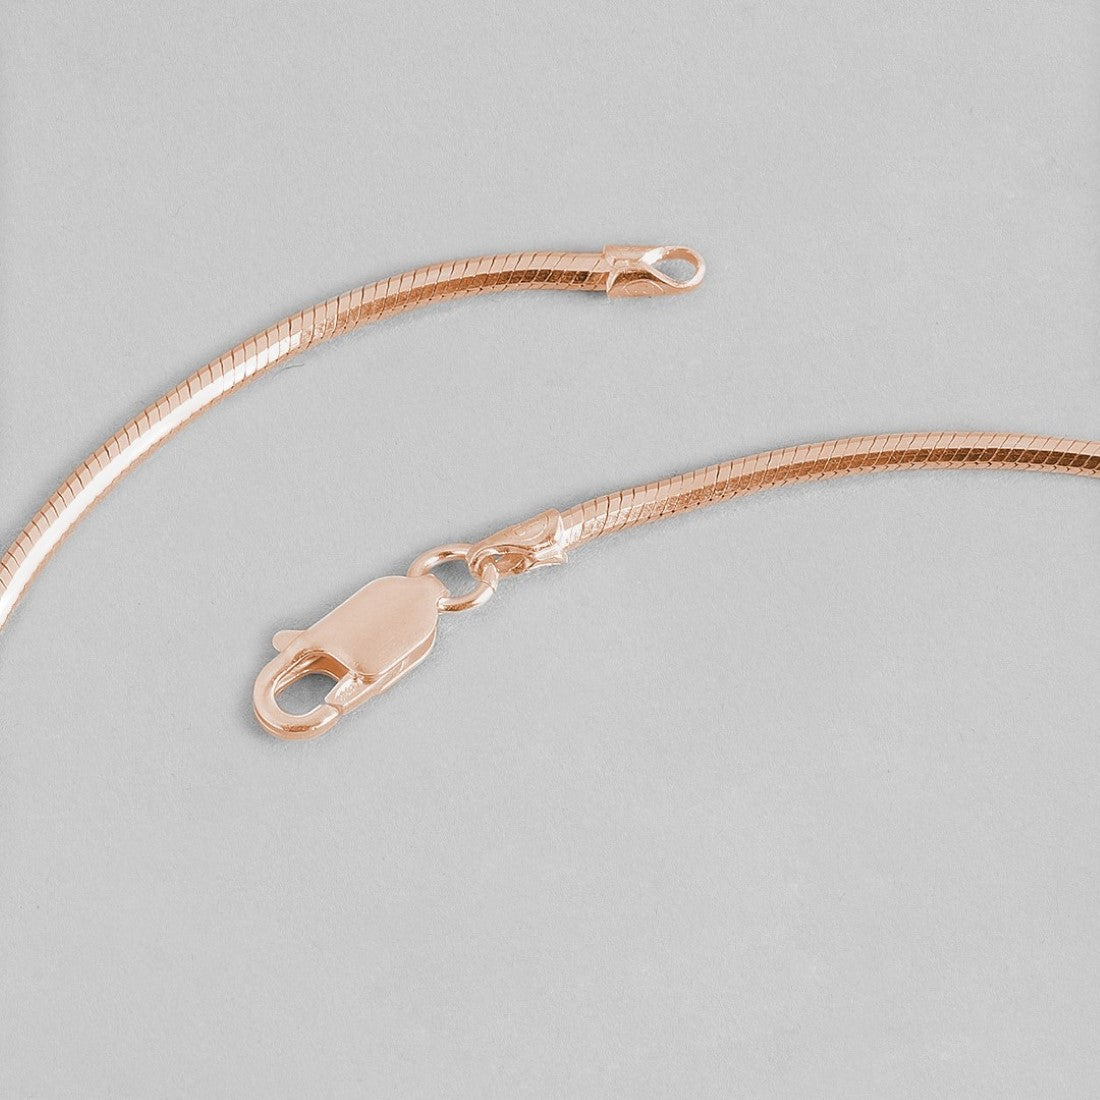 Sleek Serpent 925 Sterling Silver Men's Rose Gold Plated Chain